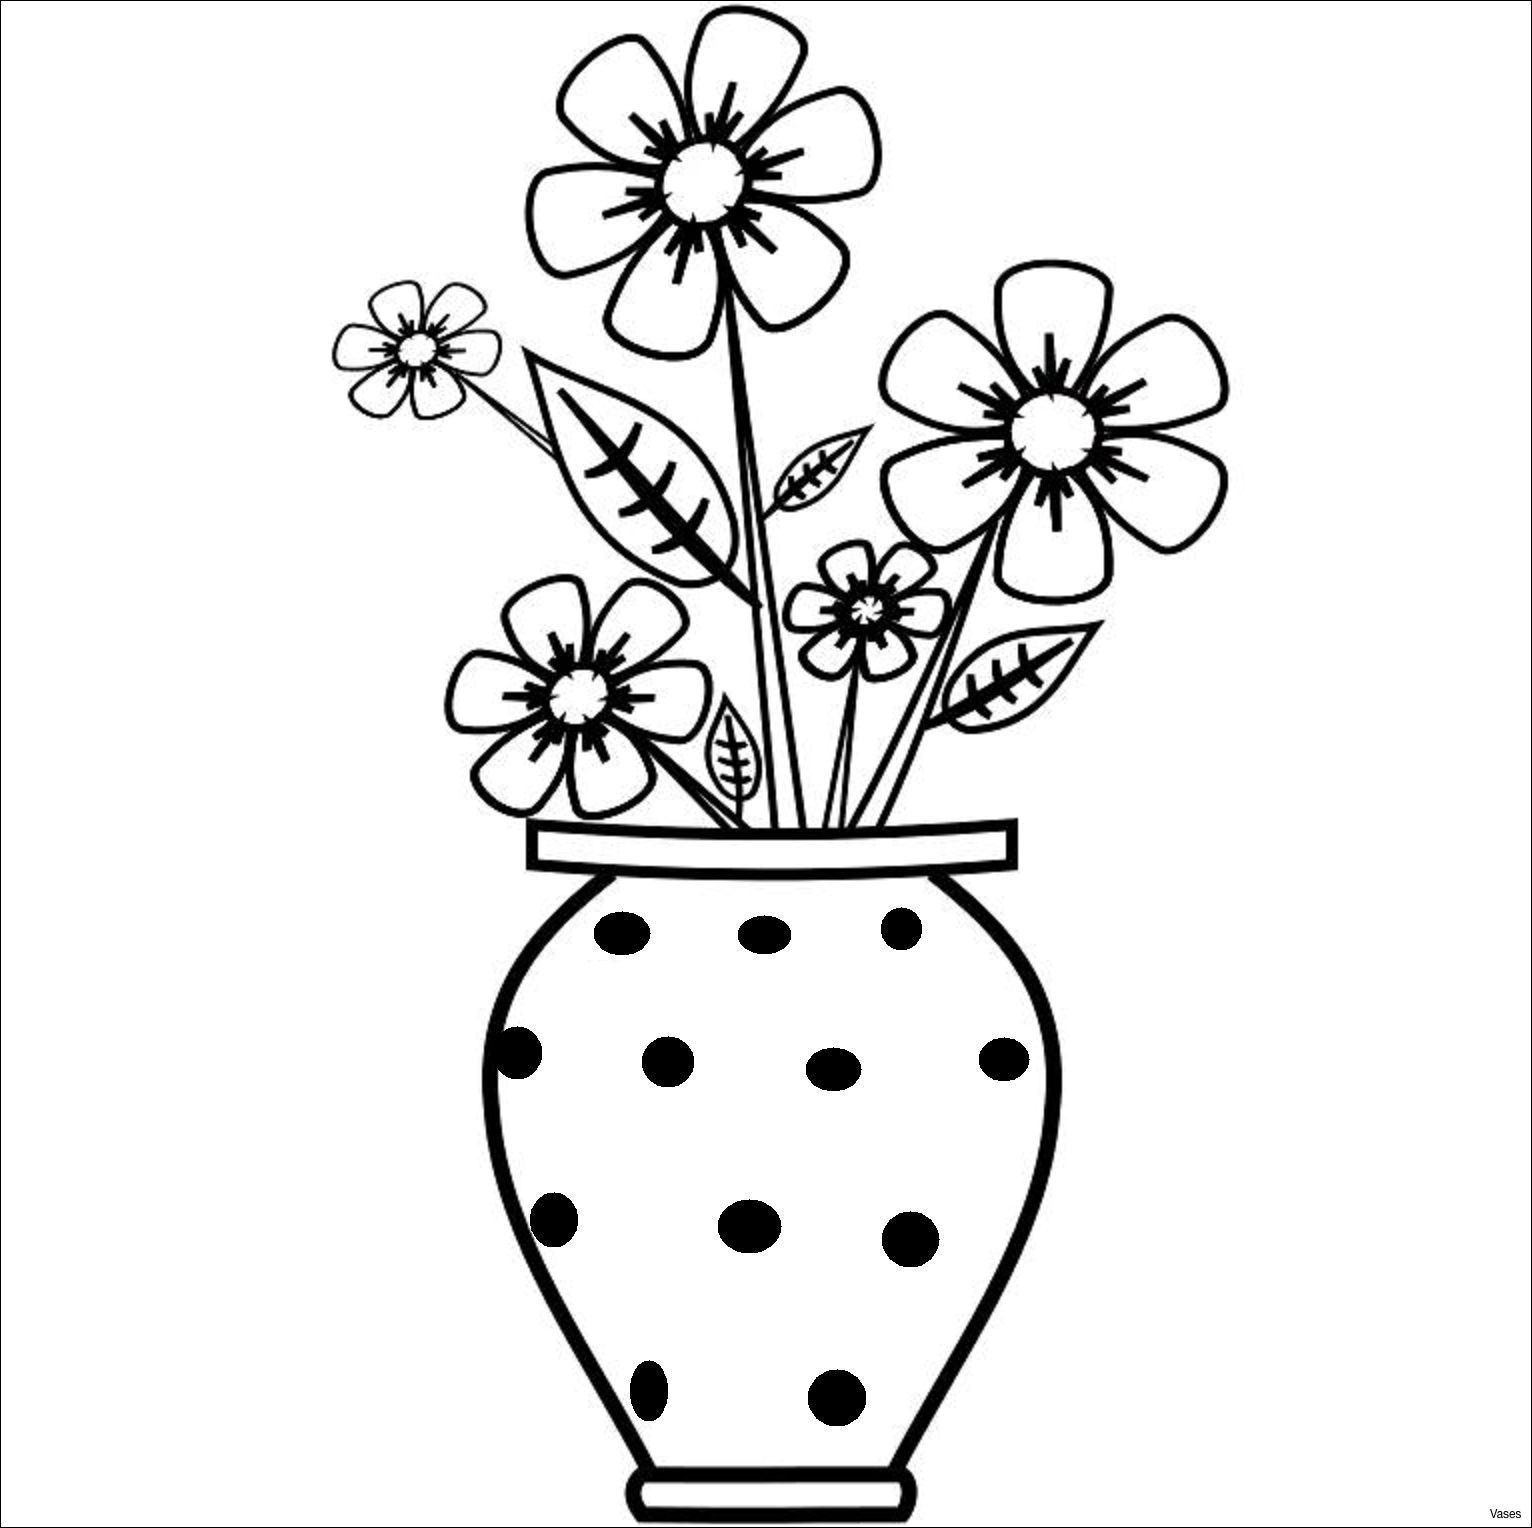 14 Stylish Vase for Sticks 2024 free download vase for sticks of pics of drawings easy vase art drawings how to draw a vase step 2h with regard to pics of drawings easy vase art drawings how to draw a vase step 2h vases by